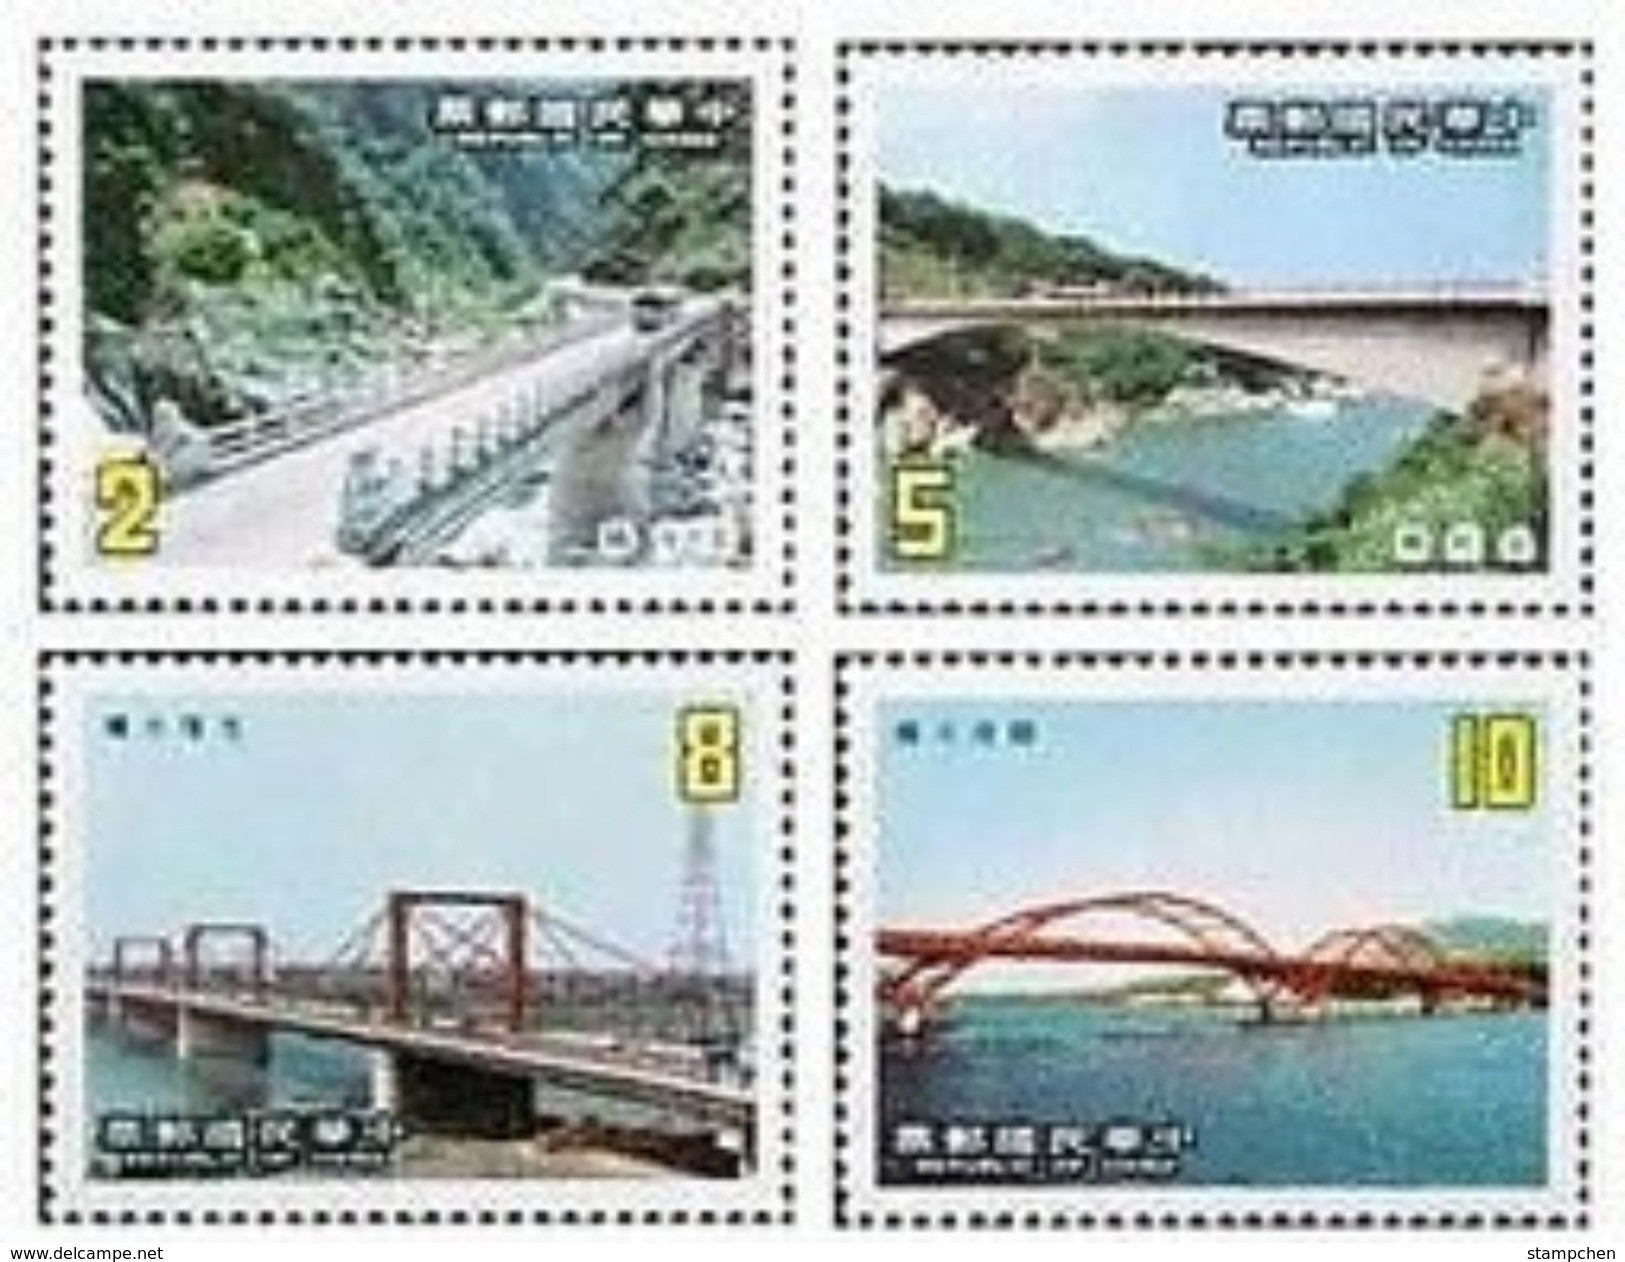 1986 Taiwan Bridge Stamps Boating Rafting Architecture River Scenery Bus - Bus